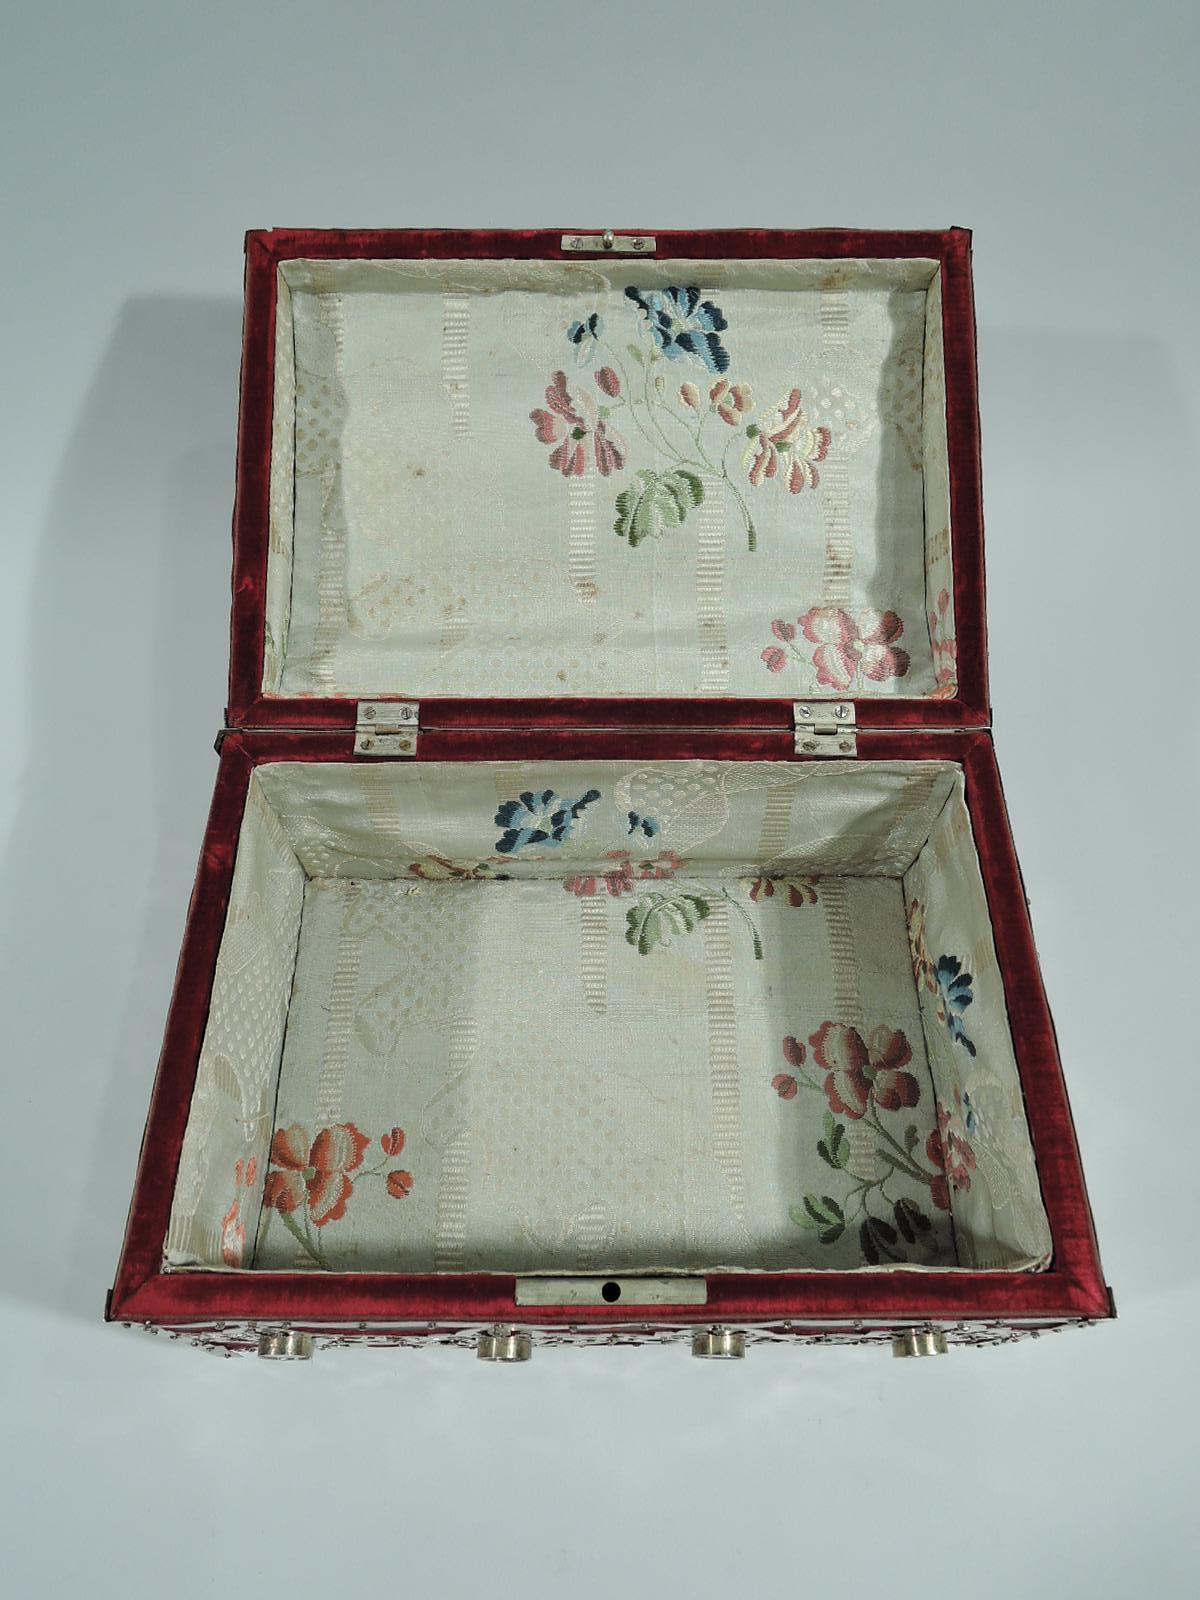 19th Century Antiquarian Heirloom Casket with Miniature Watercolor Portraits